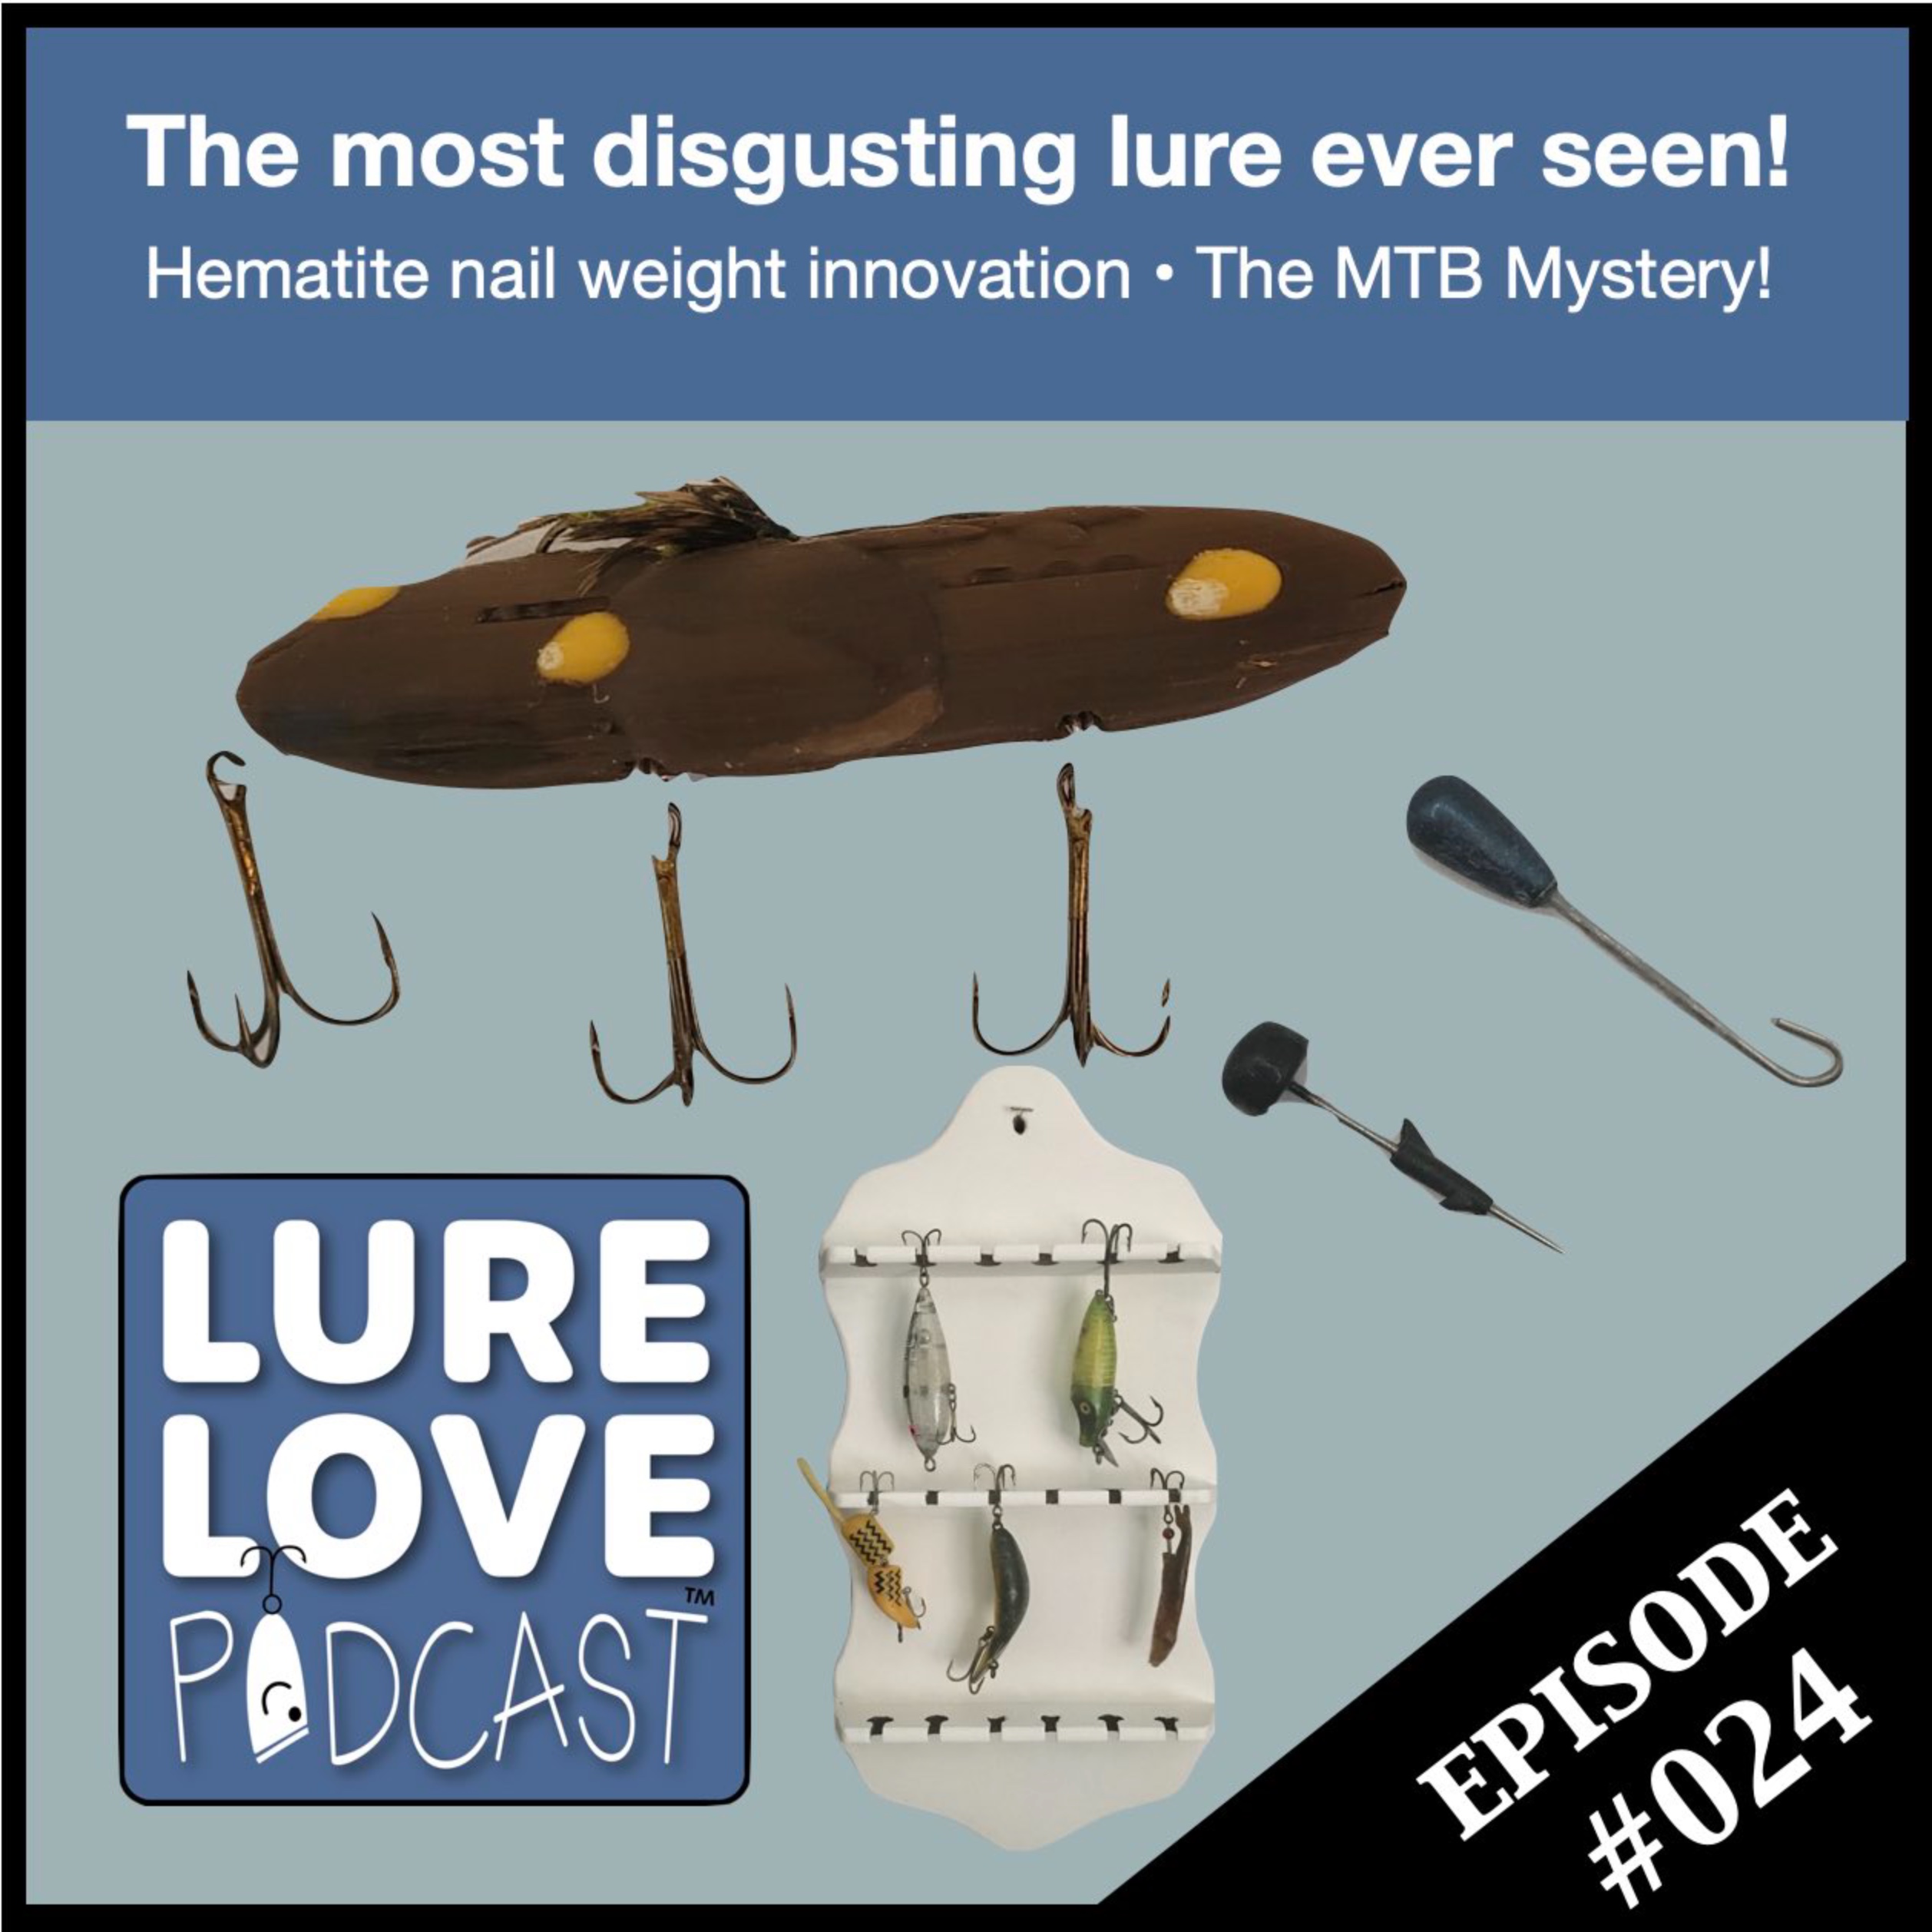 The most disgusting lure ever seen! Image